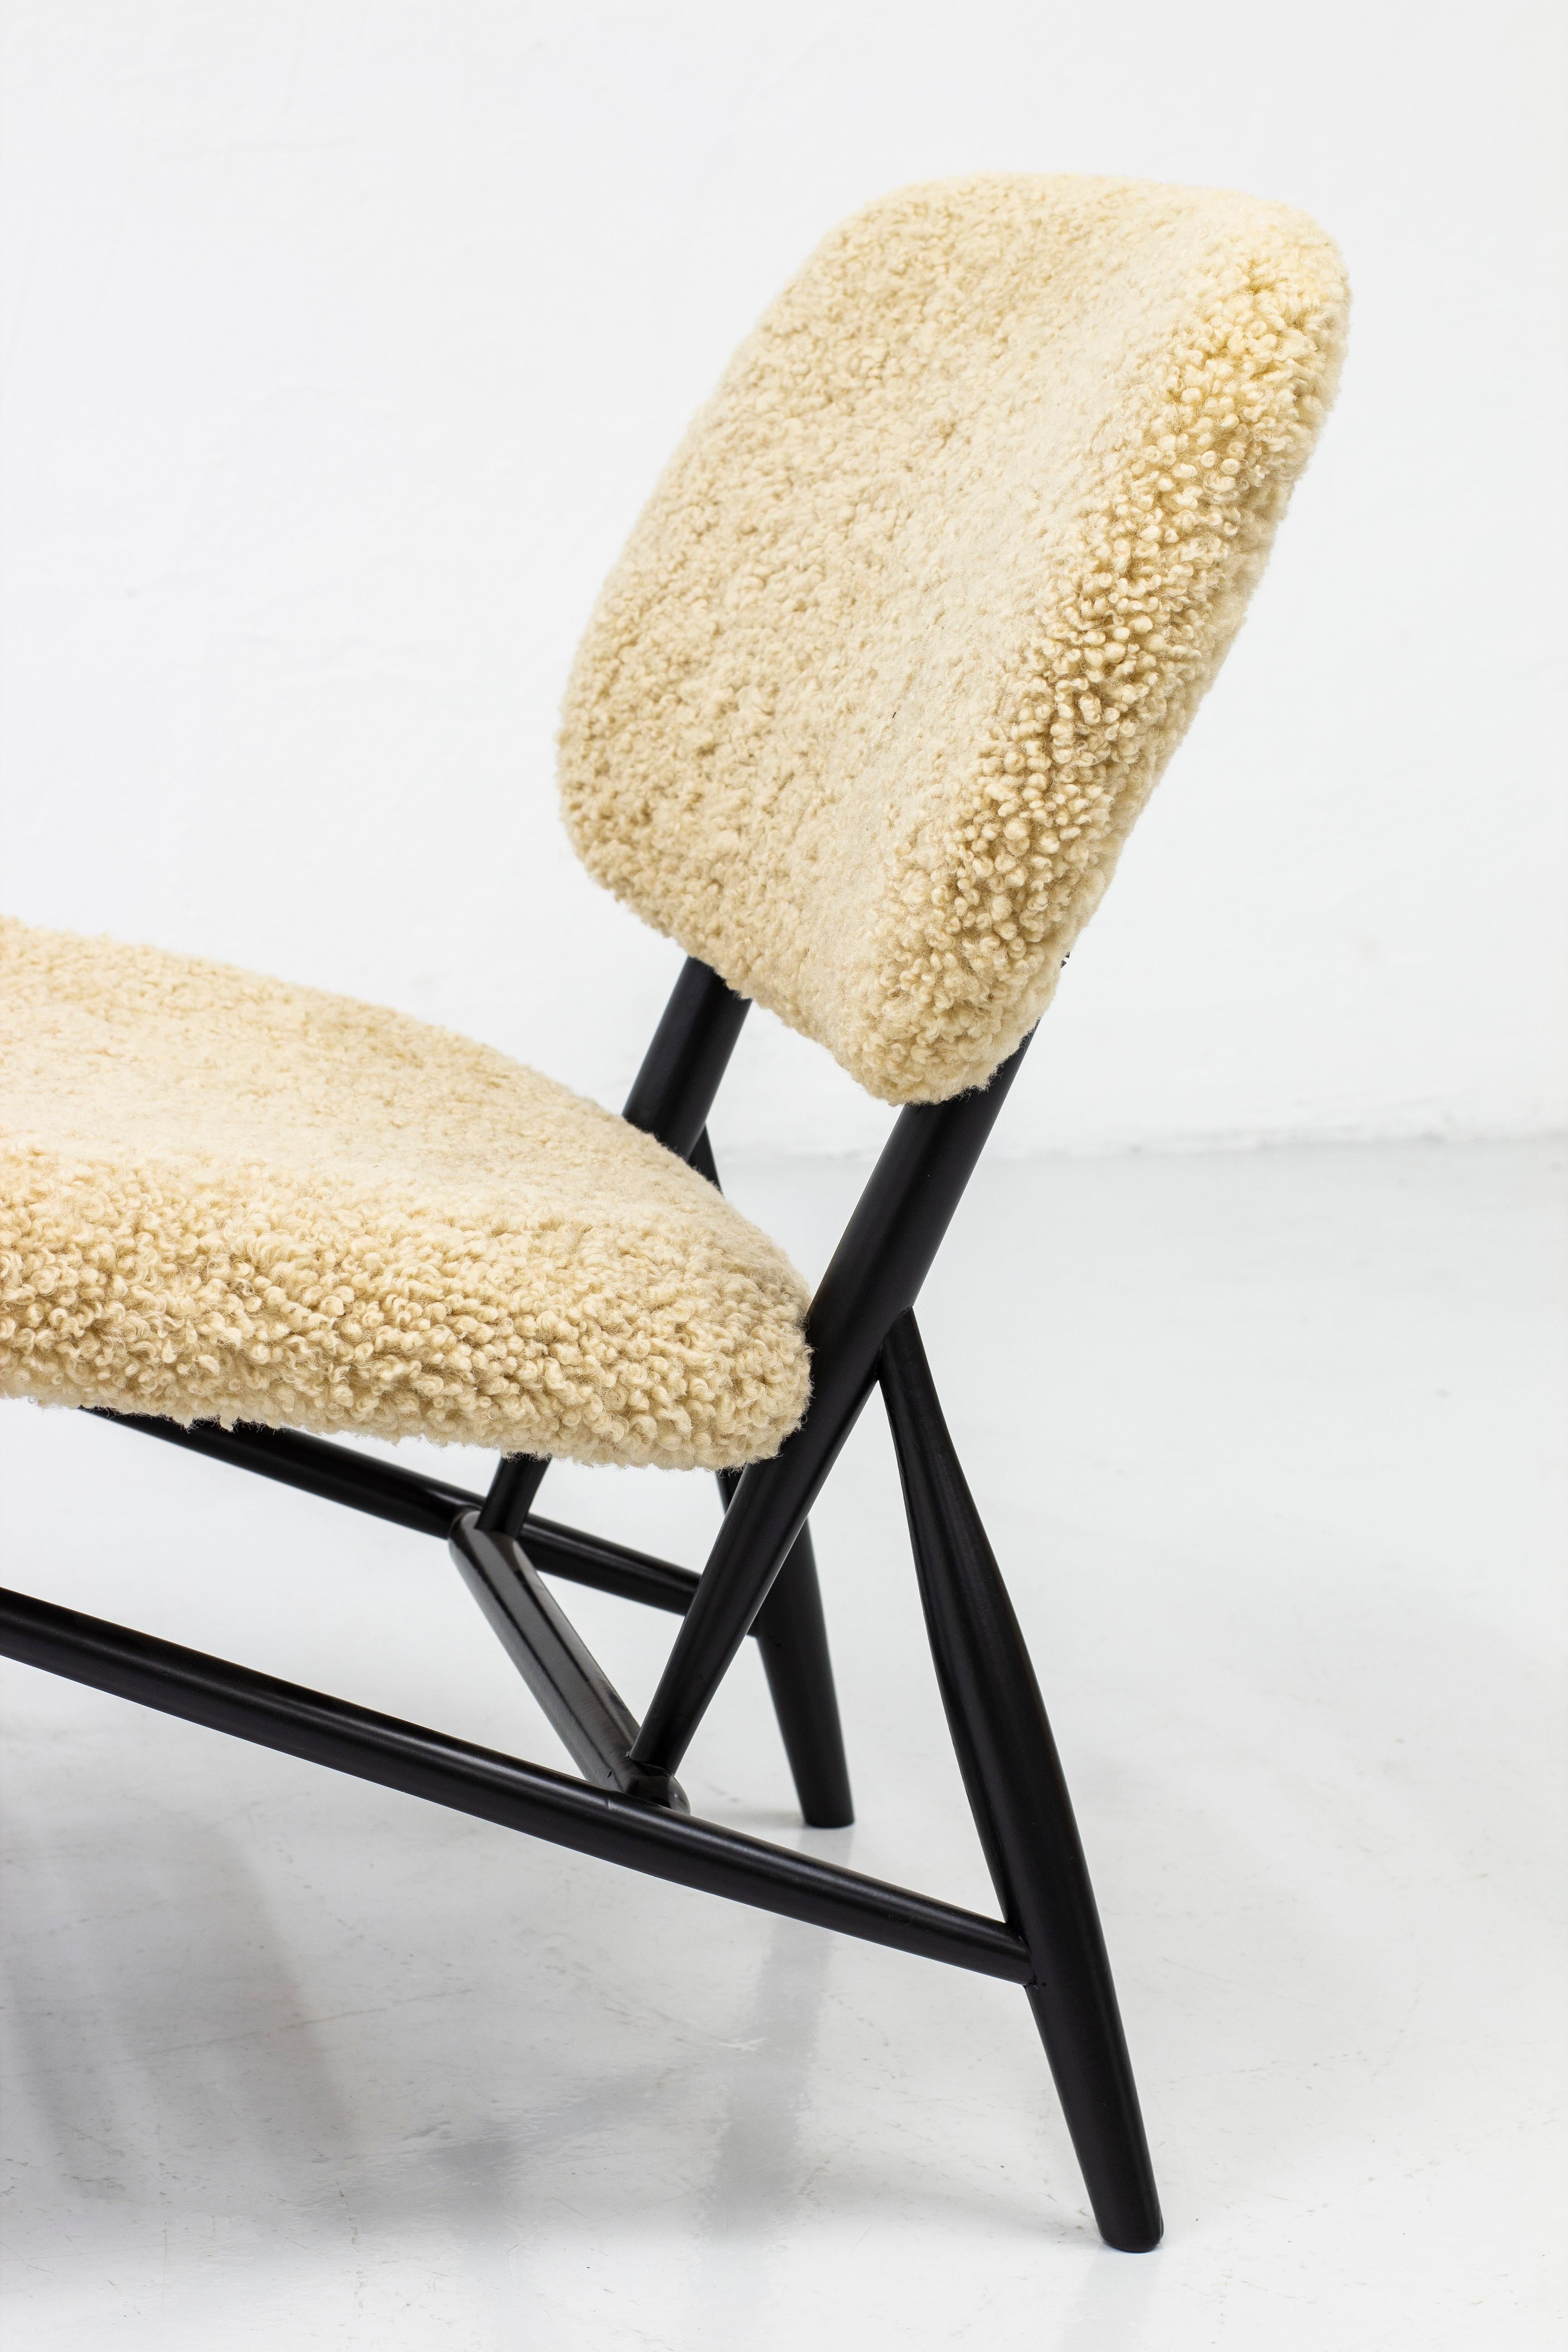 Mid-20th Century Lounge Chair with Sheep Skin by Slöjd & Möbler, in the Manner of Alf Svensson